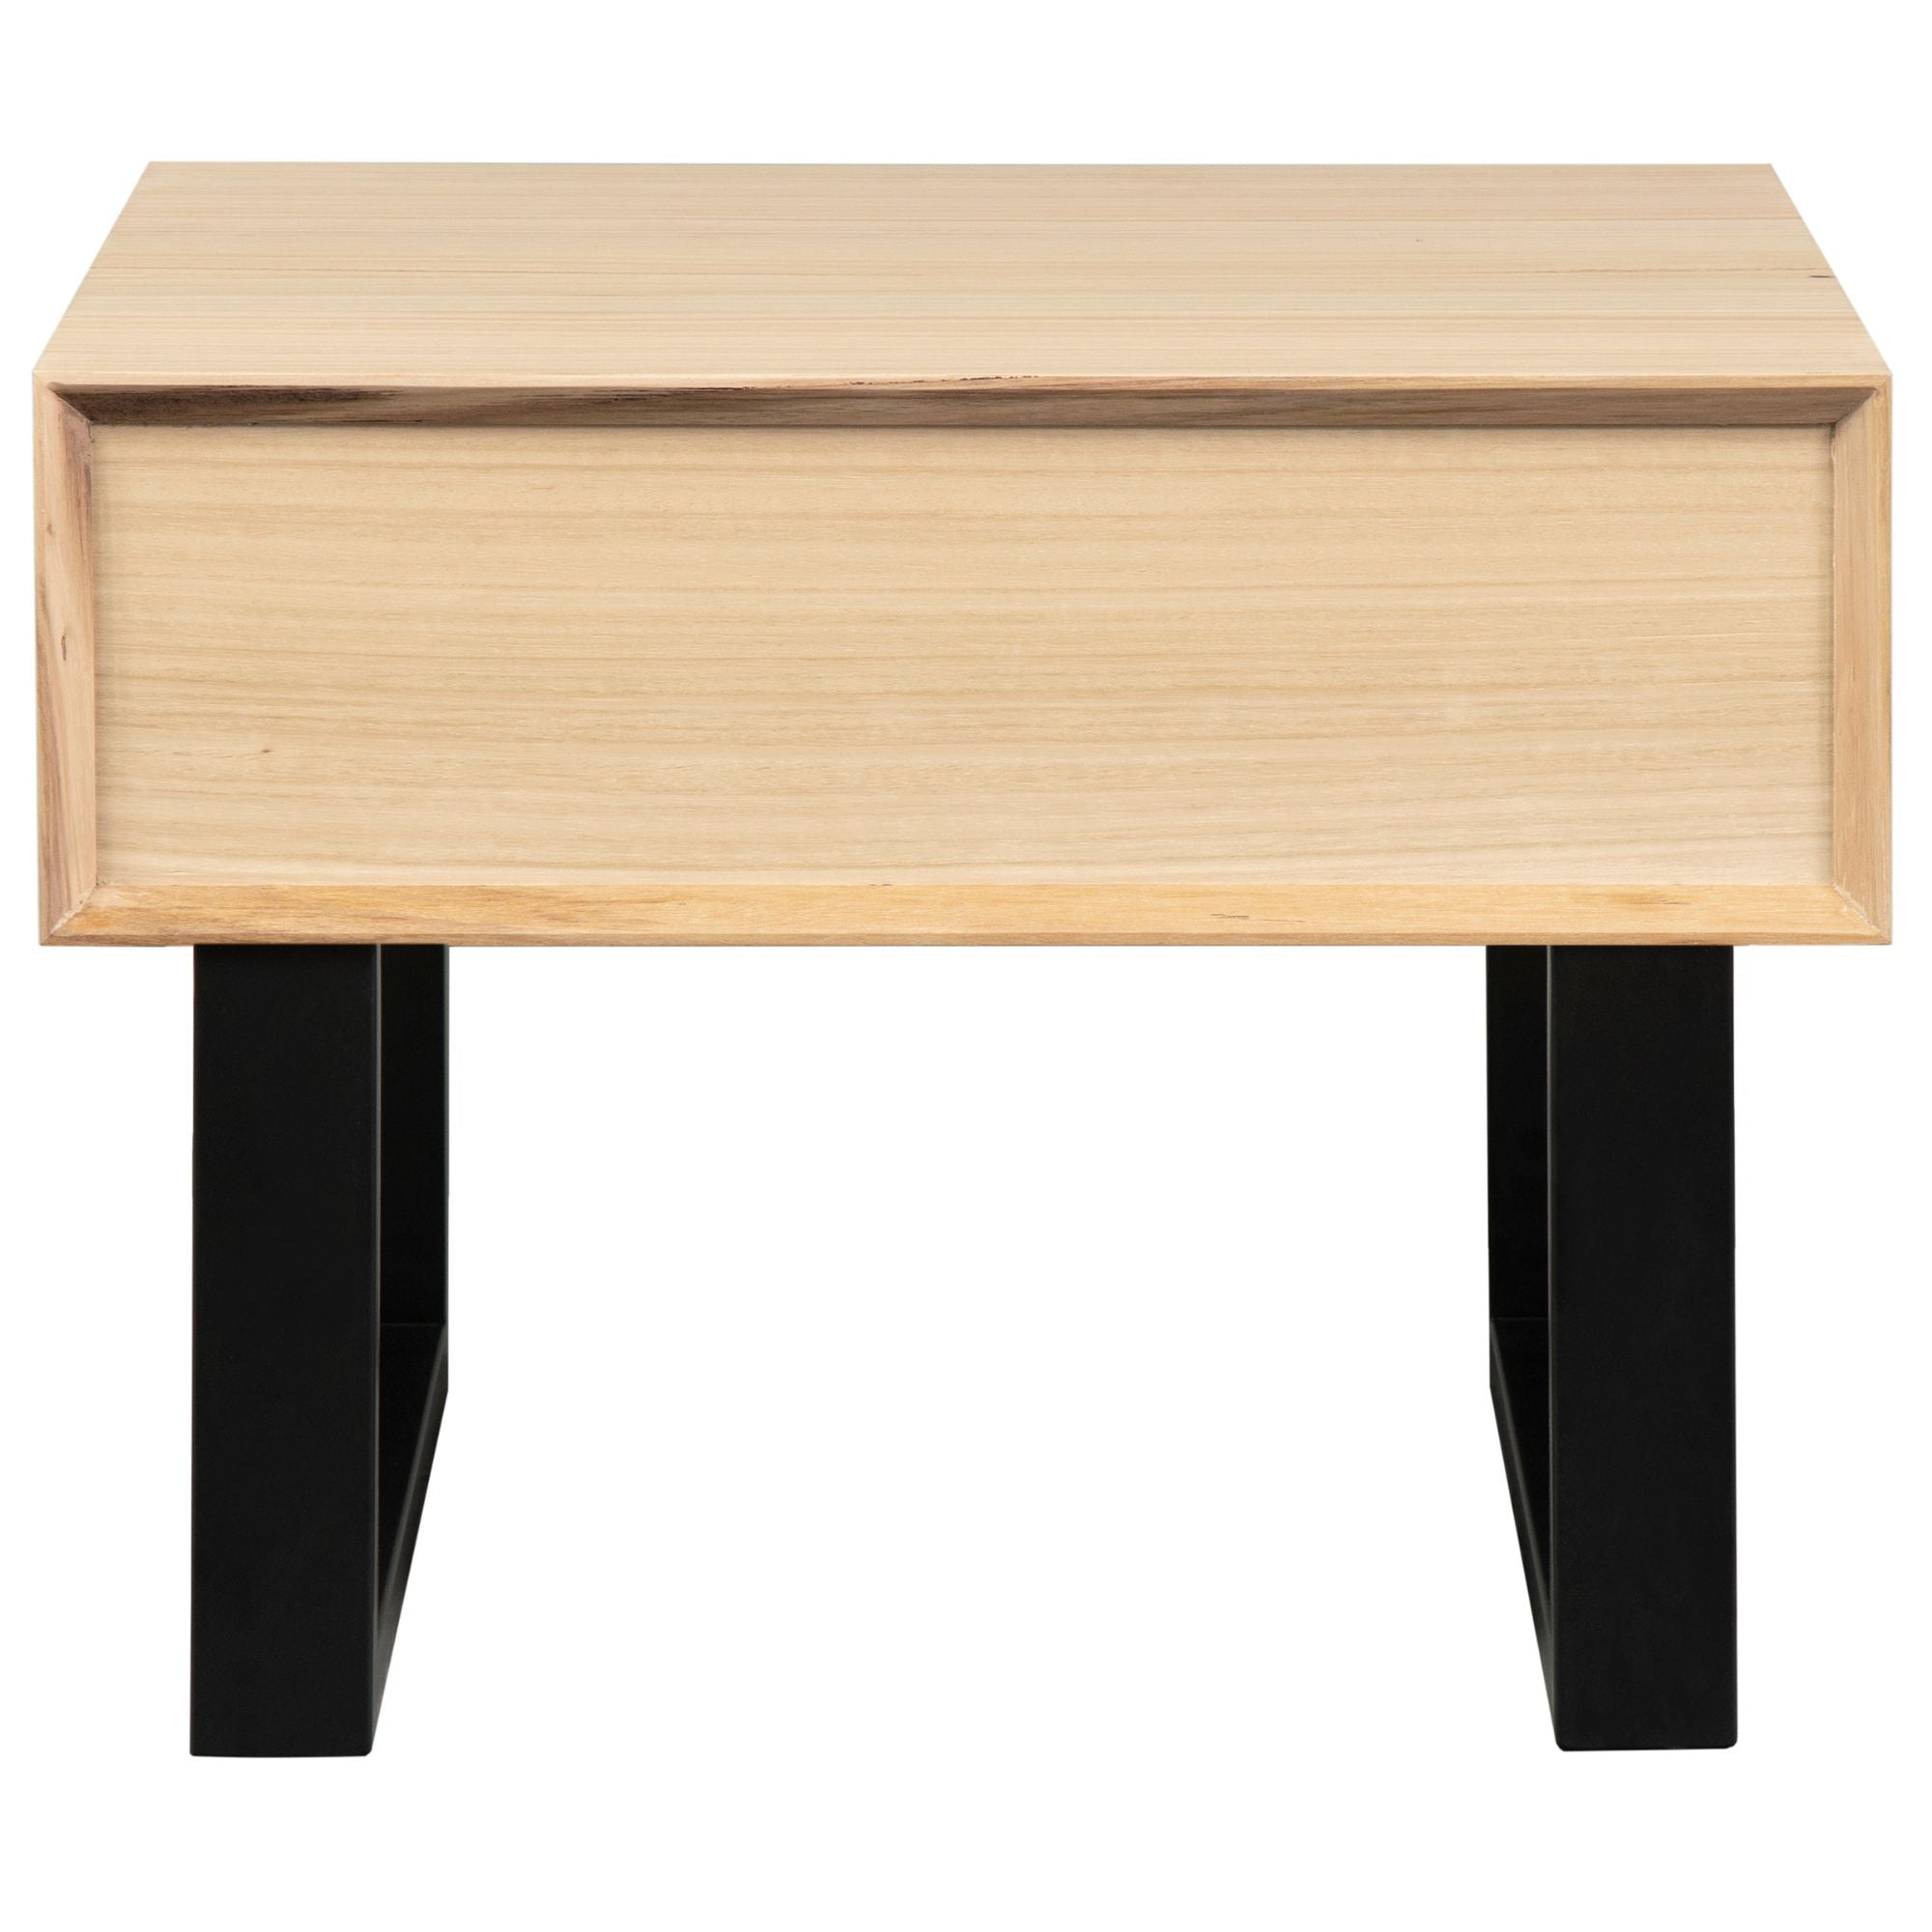 Aconite Side Table with Solid Messmate Timber Wood in Natural - 60cm - Notbrand